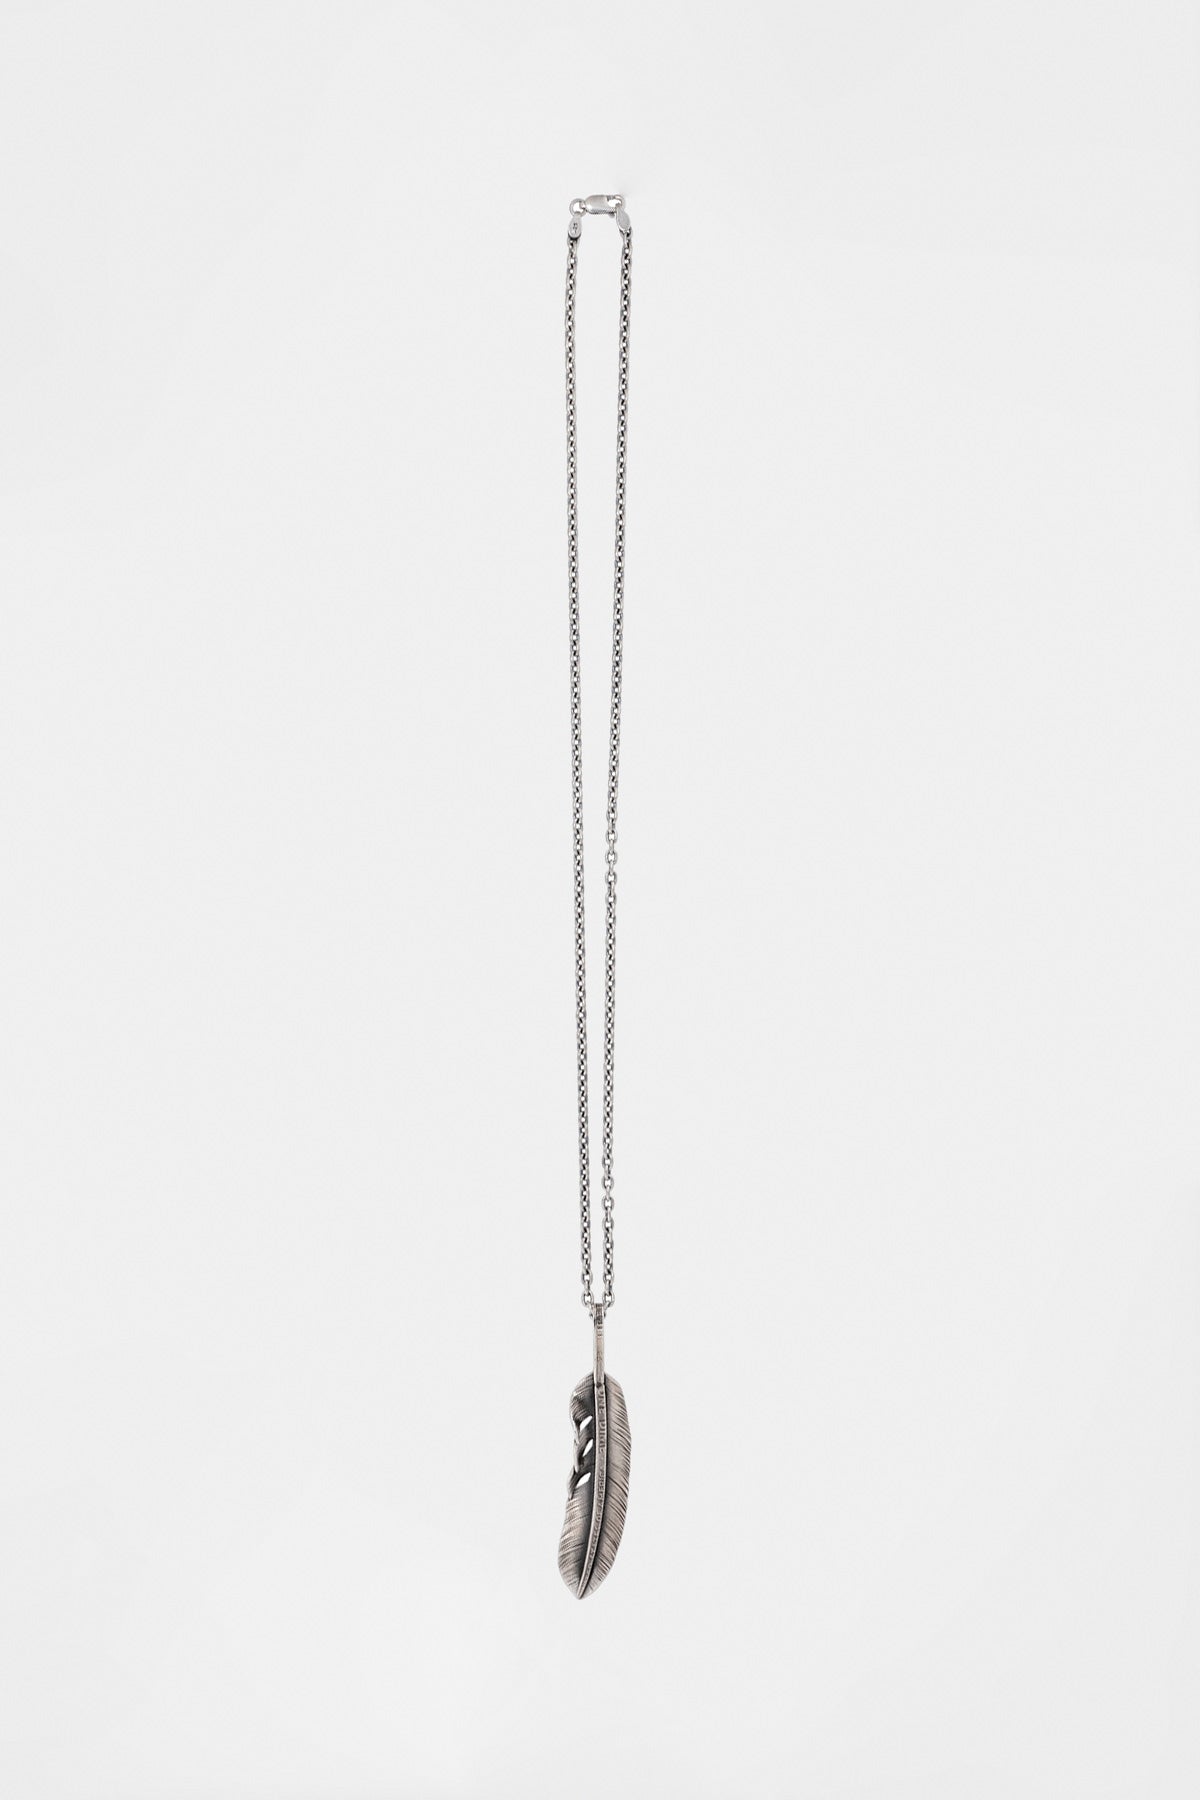 Northworks - Liberty Feather Necklace with Chain - Canoe Club